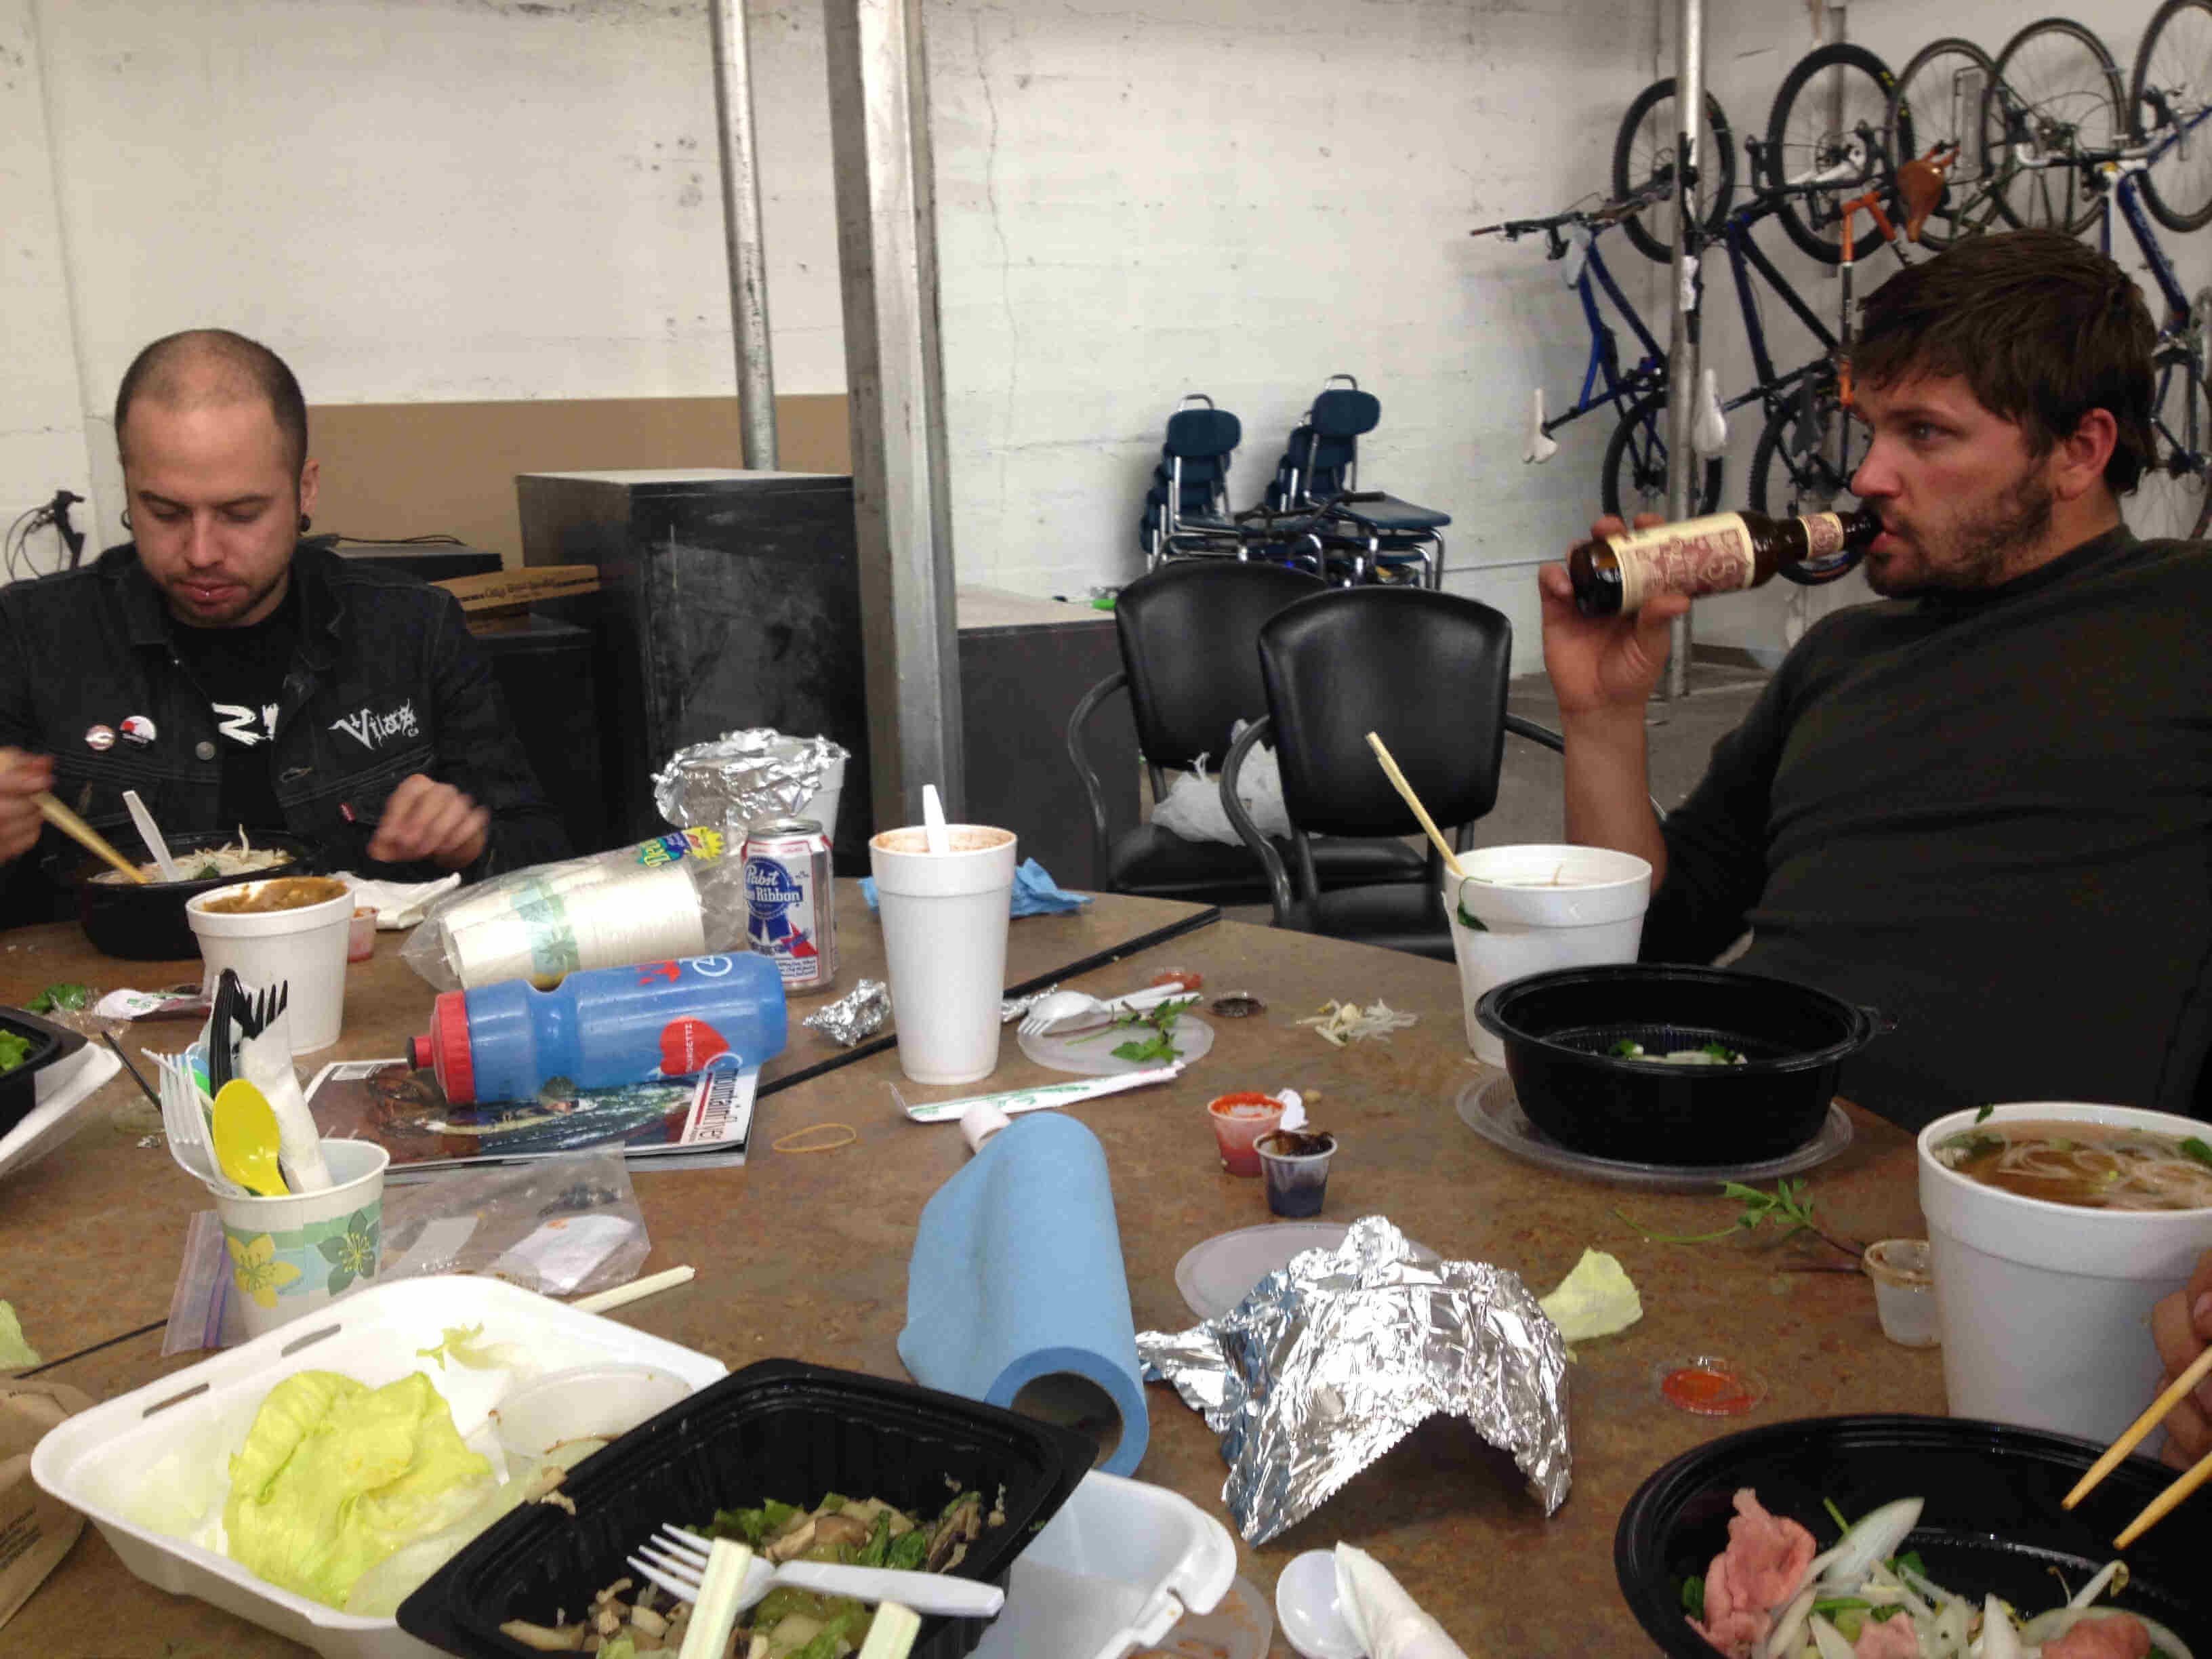 A table full of take-out food, with two people sitting behind it, in a warehouse room with bikes hanging on a wall